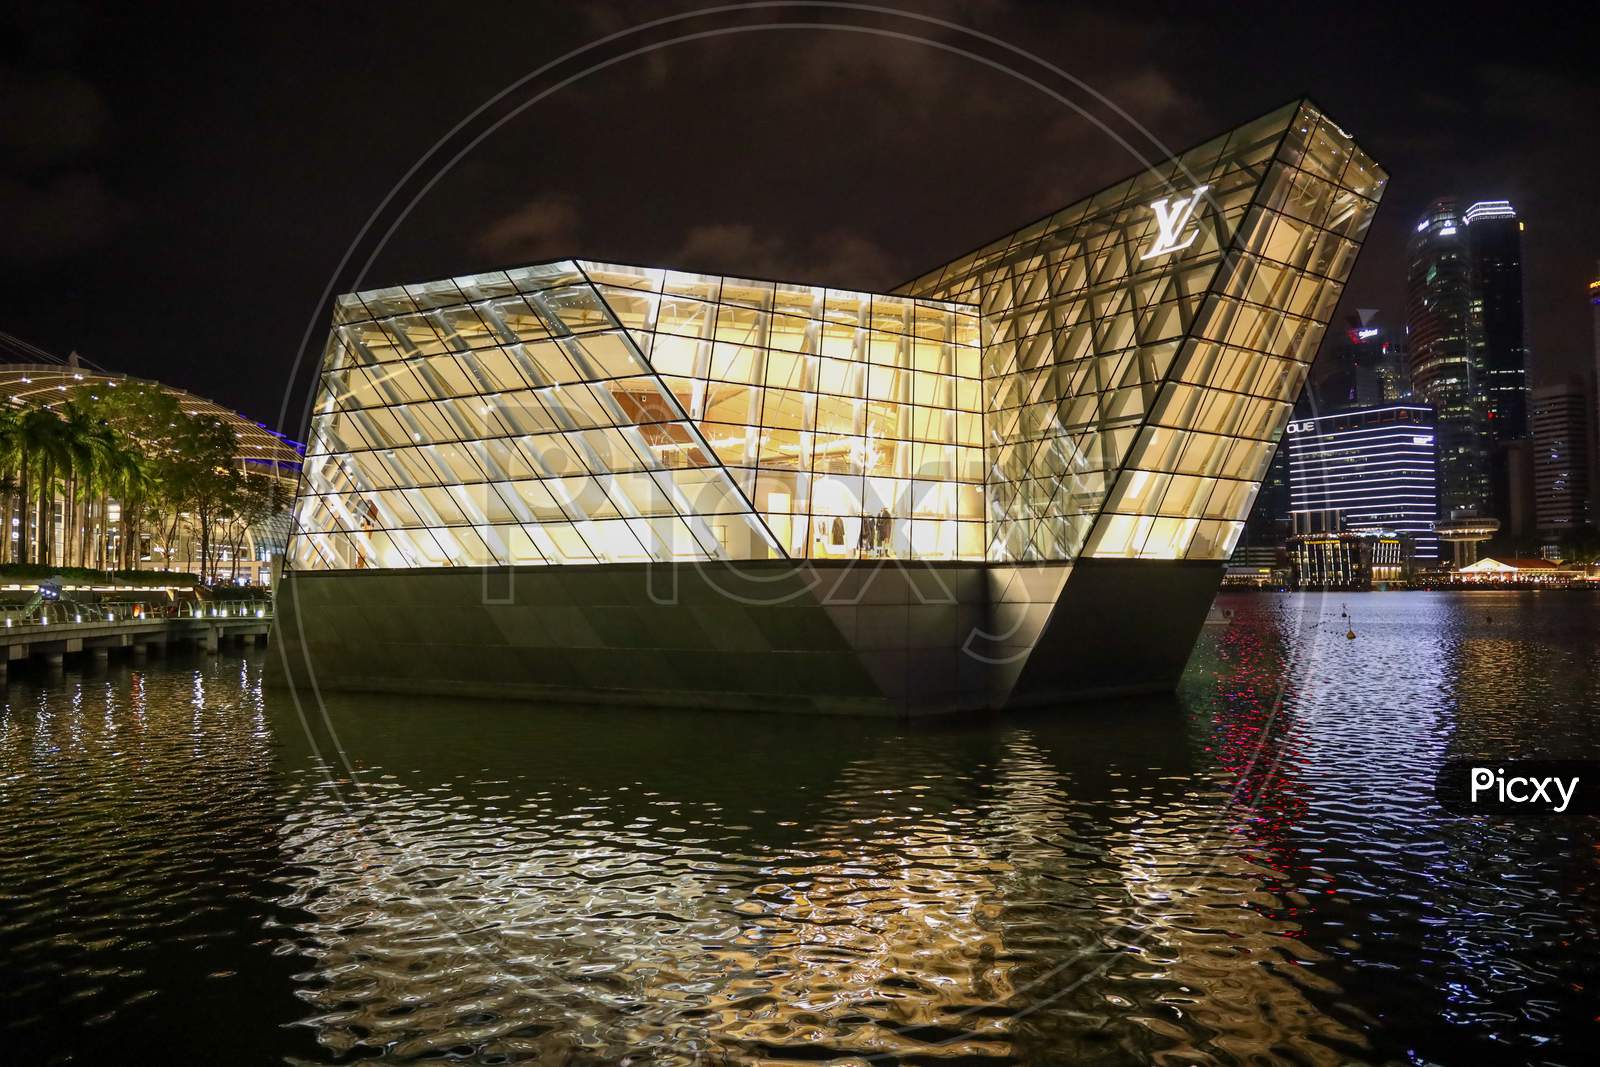 Image of Louis Vuitton Corporate Building At Marina Bay Sands